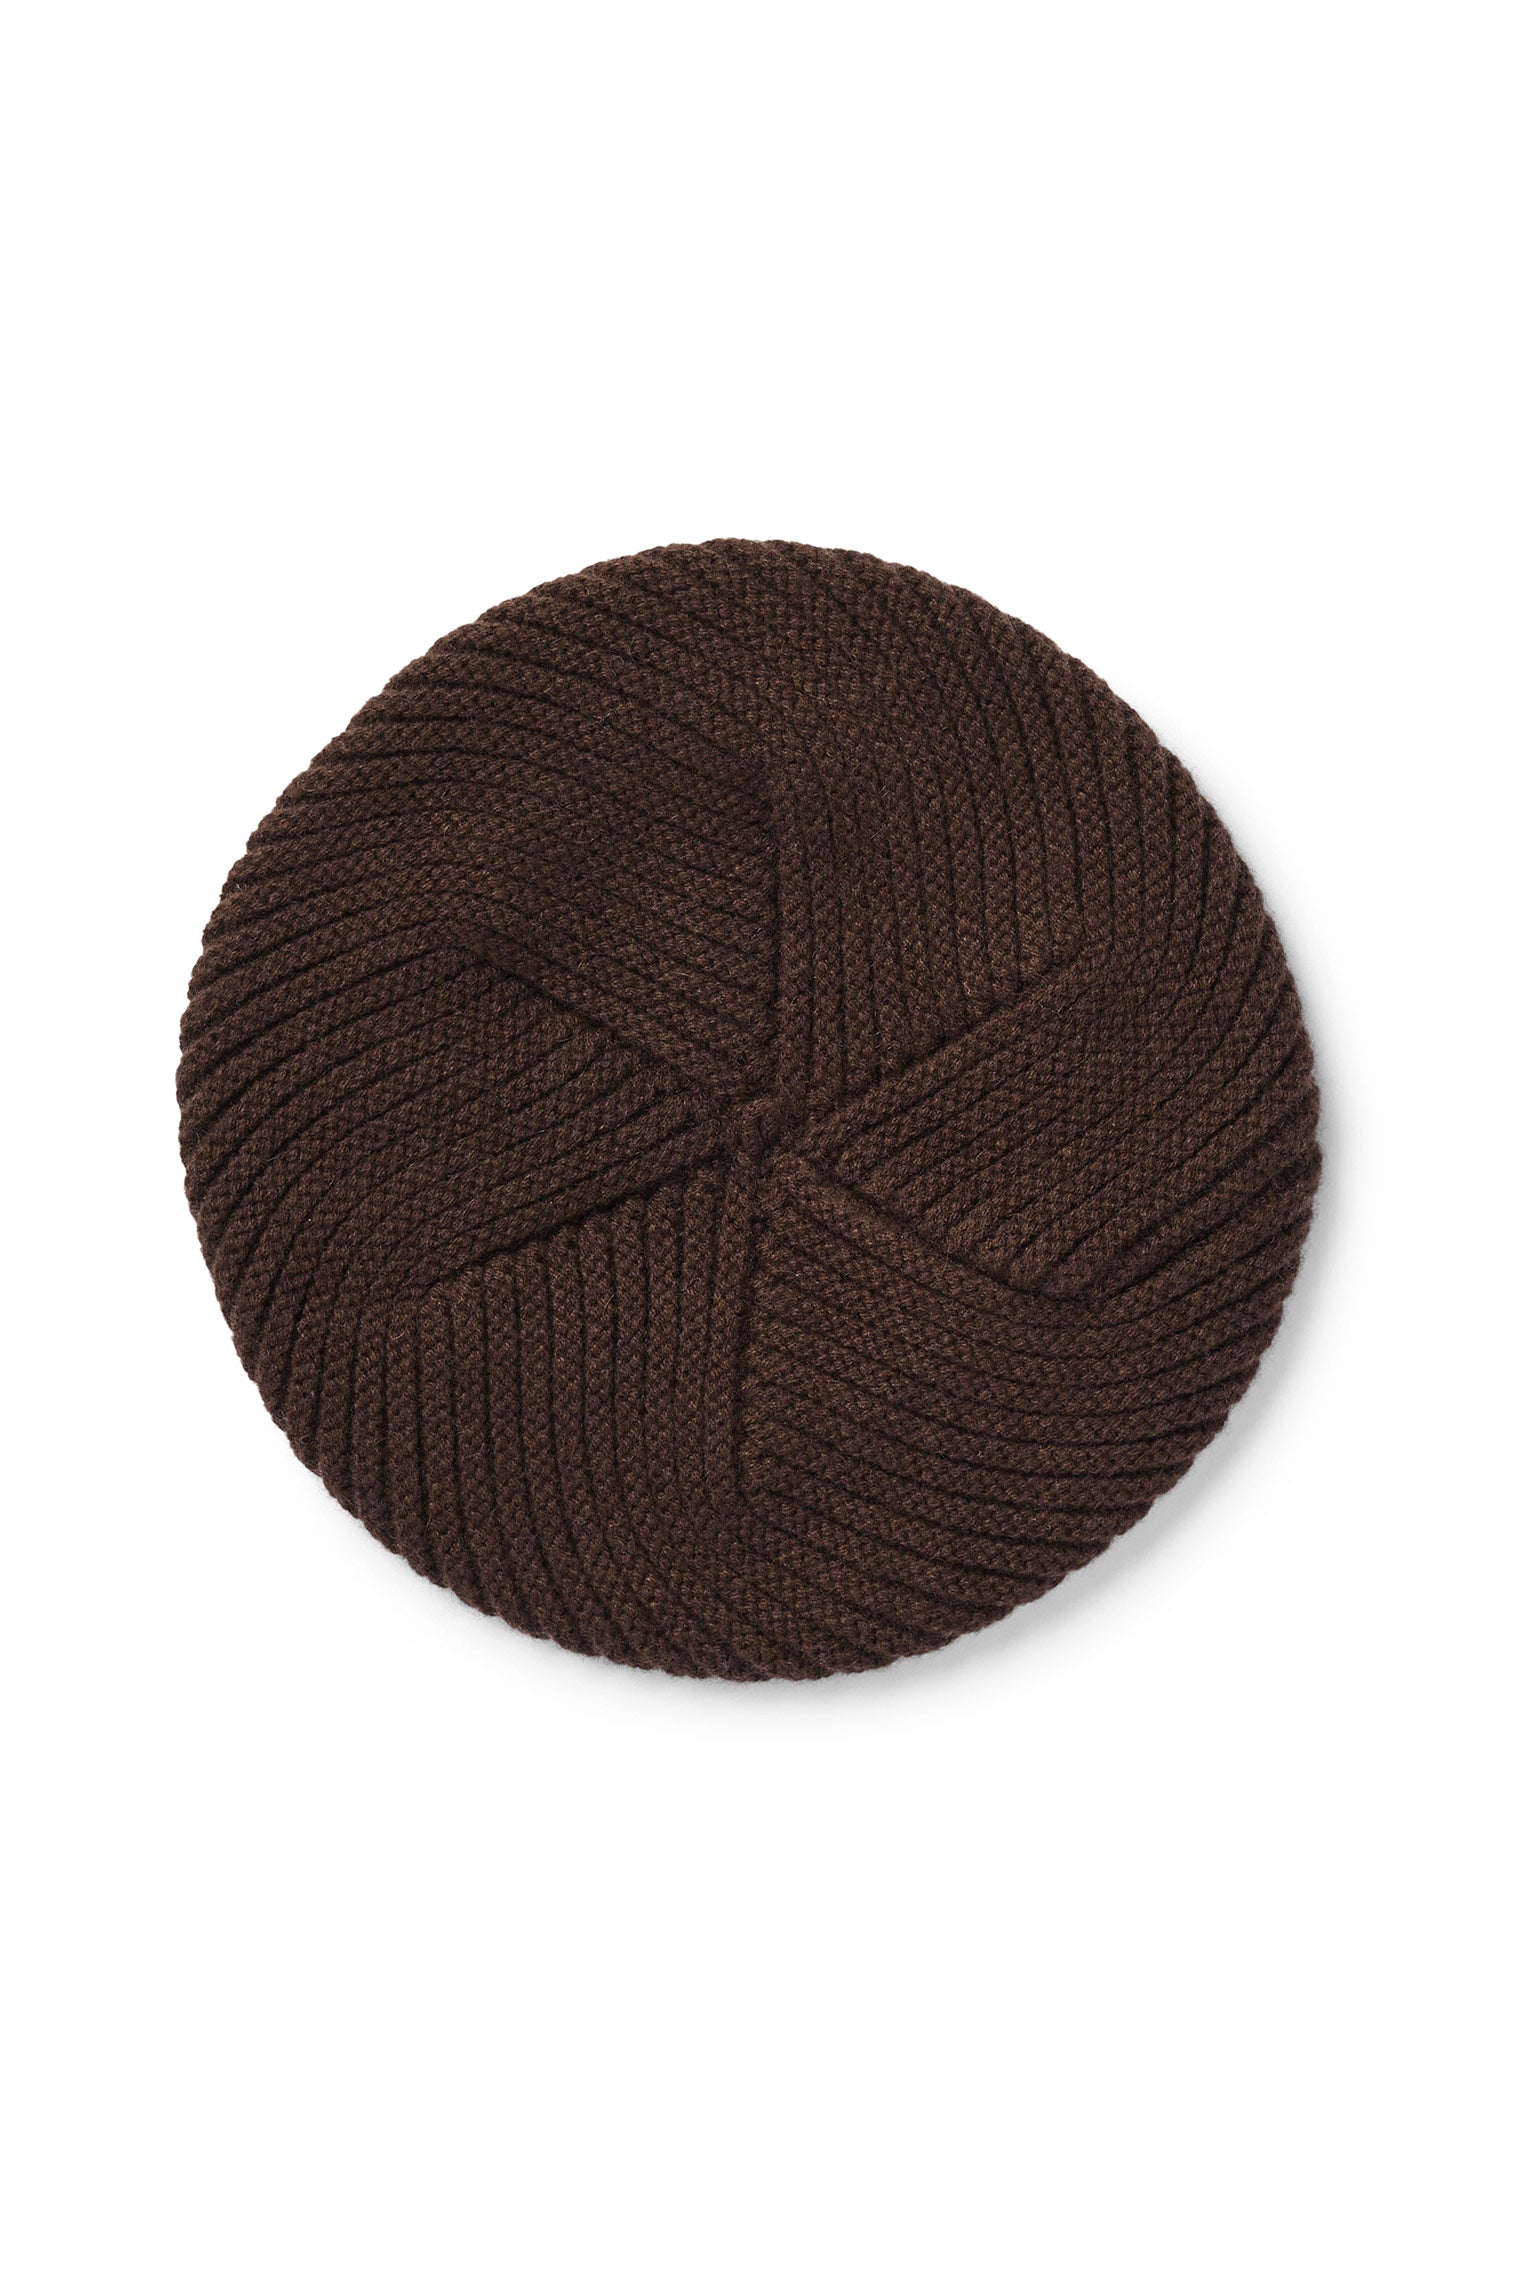 Brown Knitted Cashmere Beret - New Season Hat Collection - Lock & Co. Hatters London UK